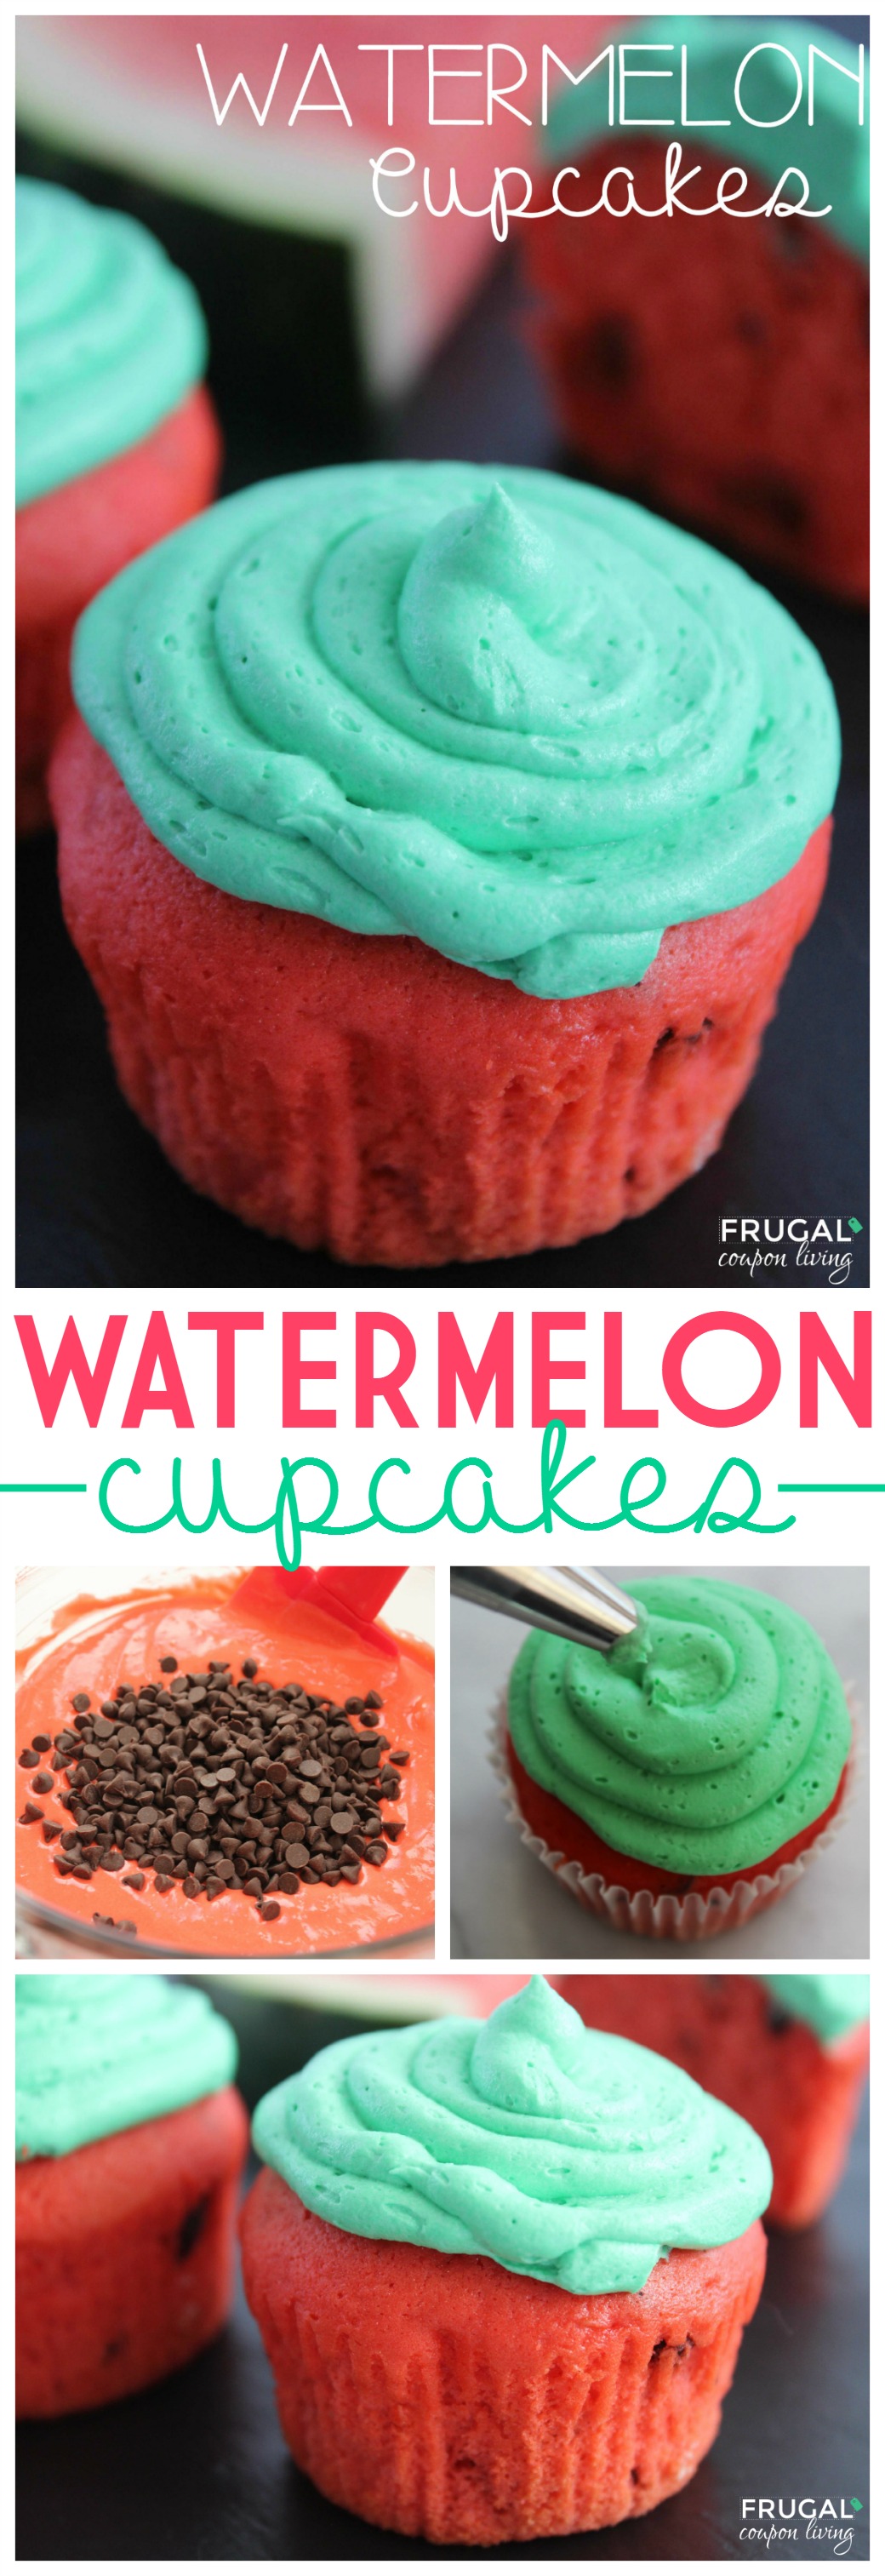 watermelon-cupcakes-Collage-frugal-coupon-living